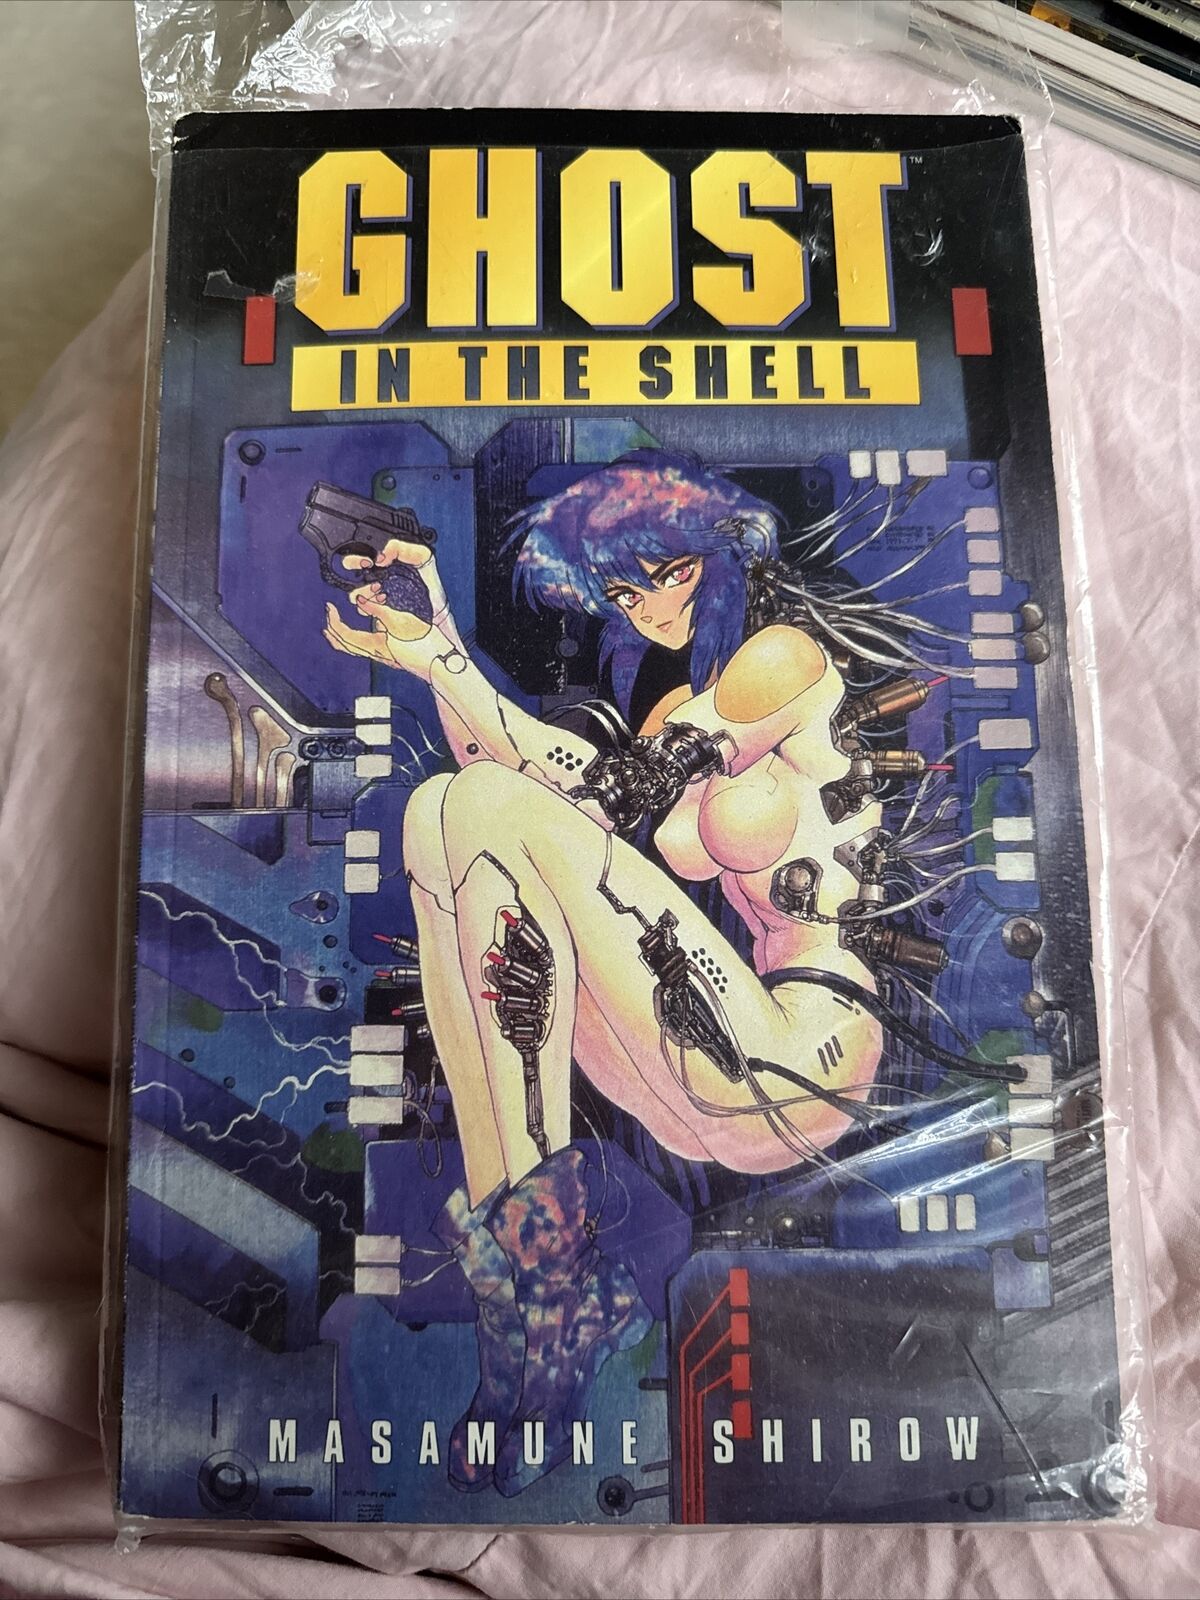 Ghost in the Shell  by Masamune Shirow (Dark Horse, 1995, 1st Edition)